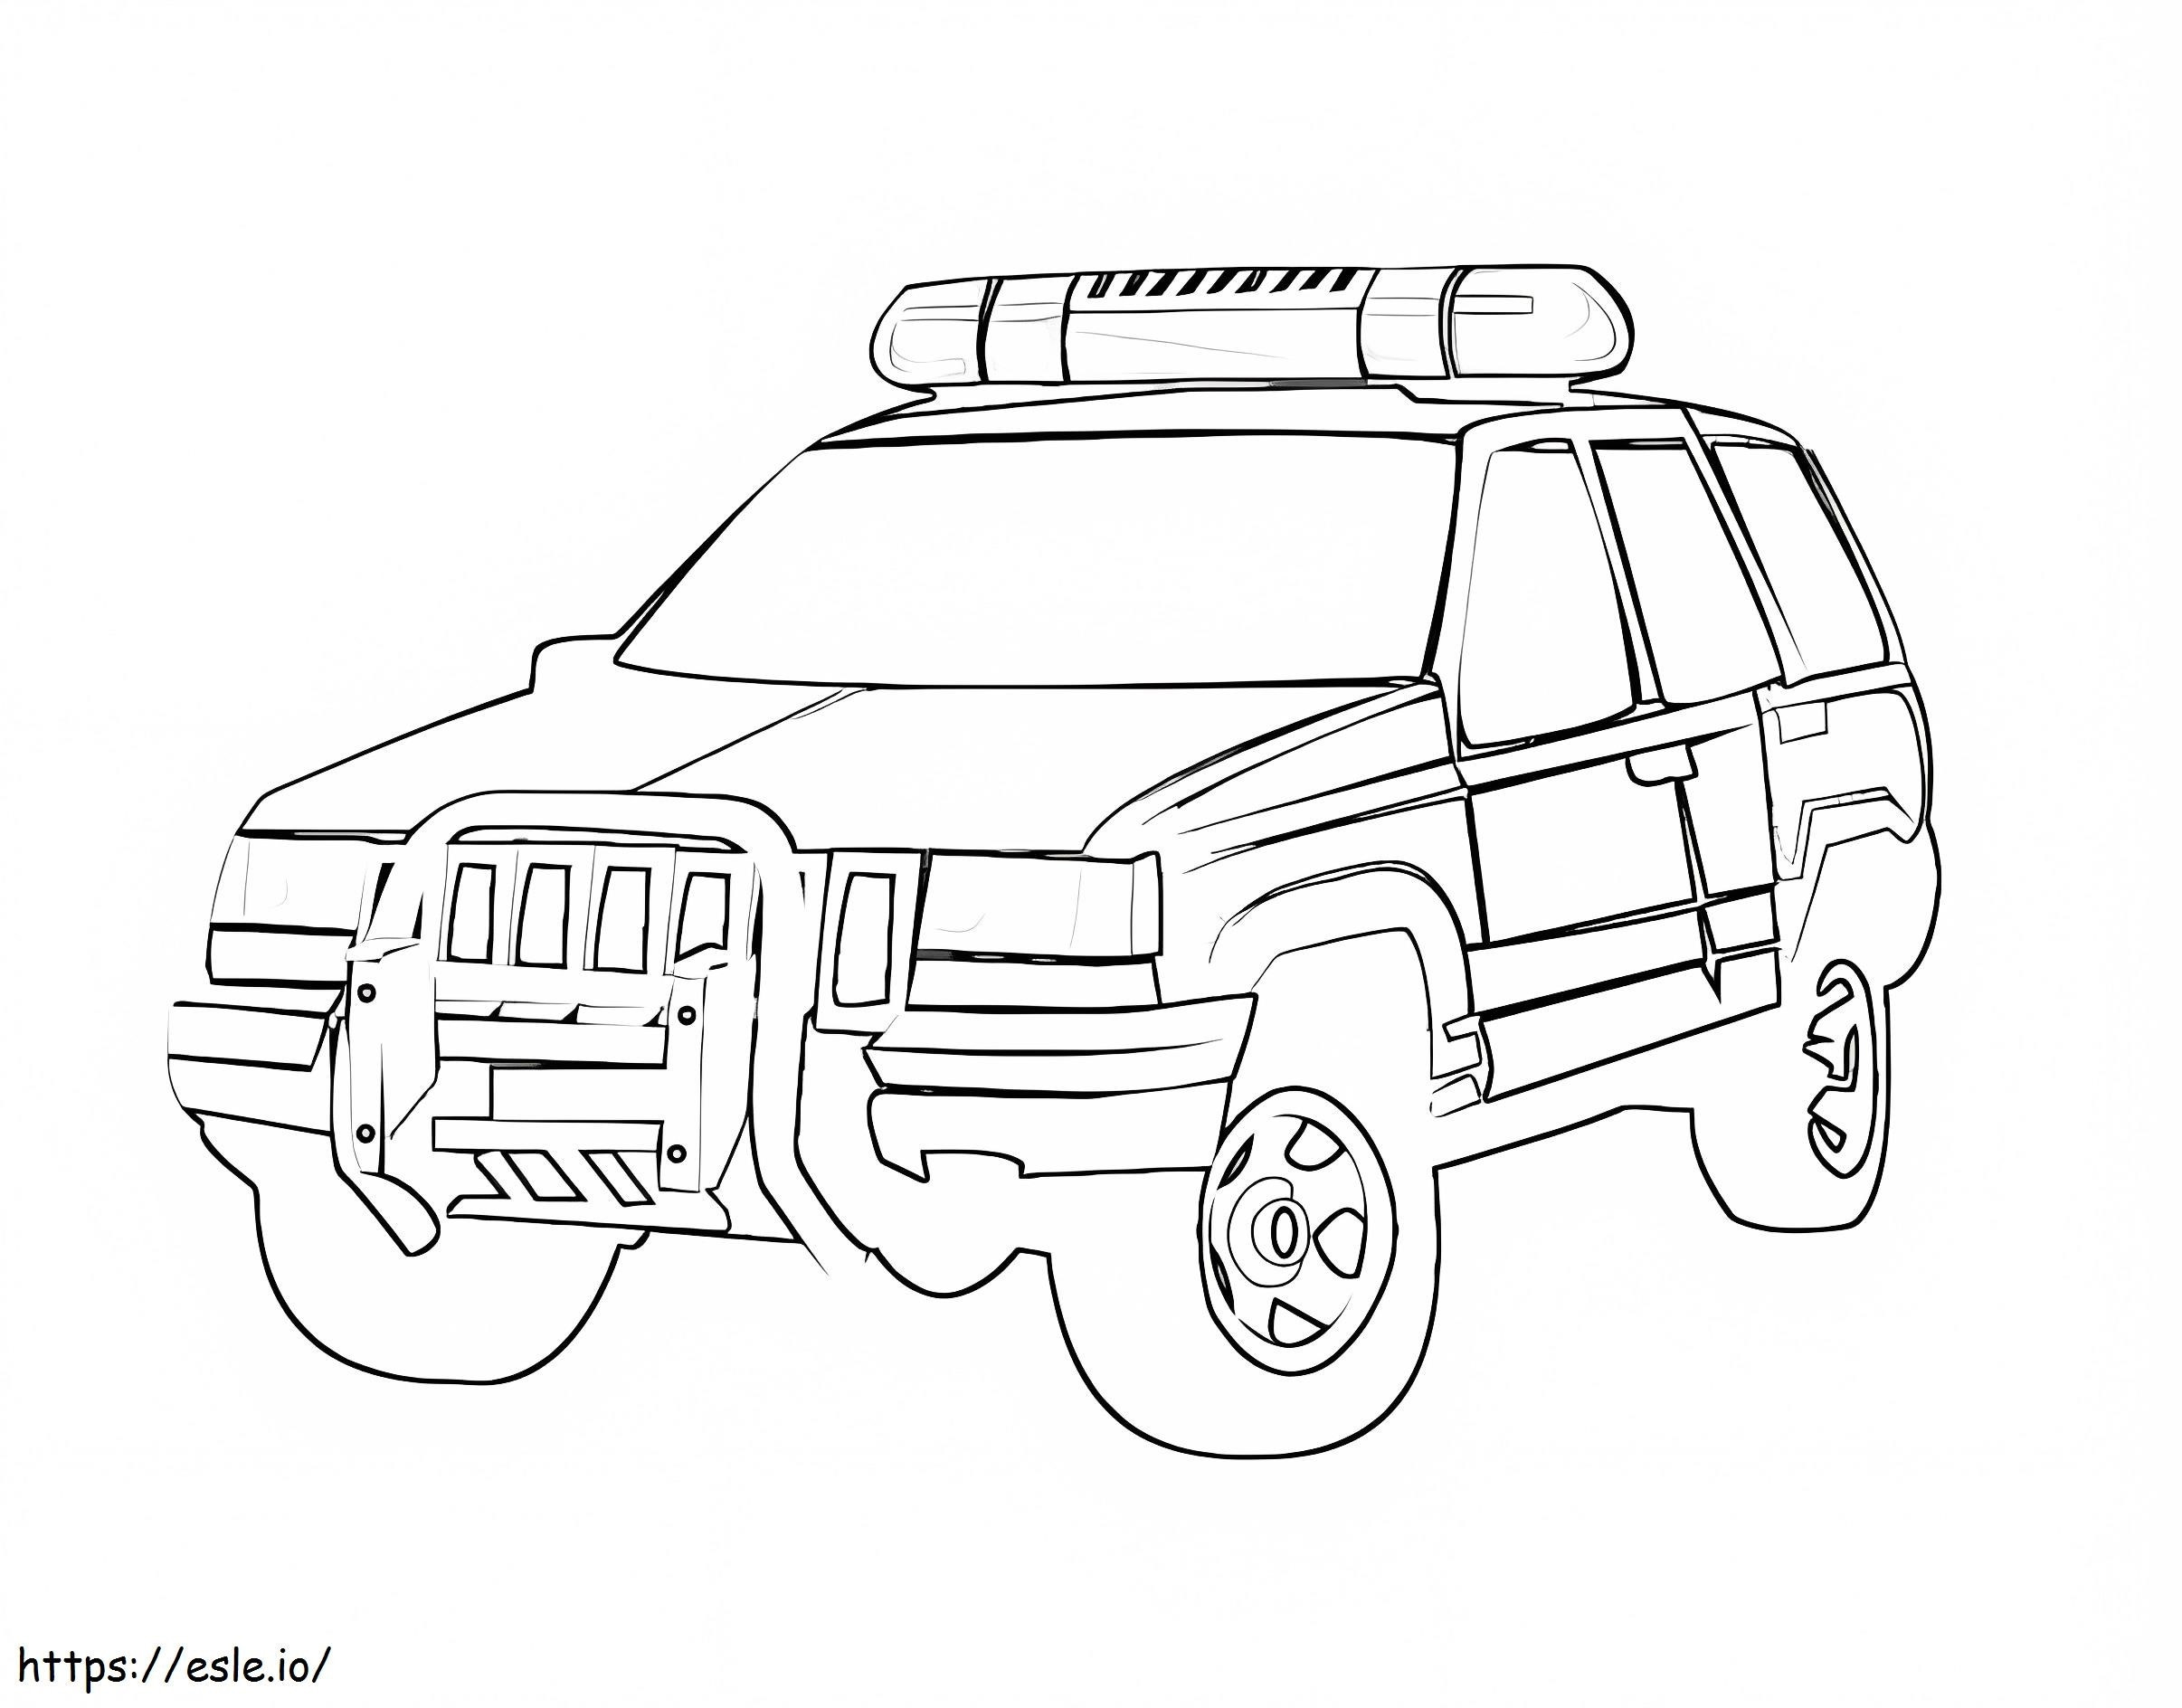 Ford Truck Police Car coloring page